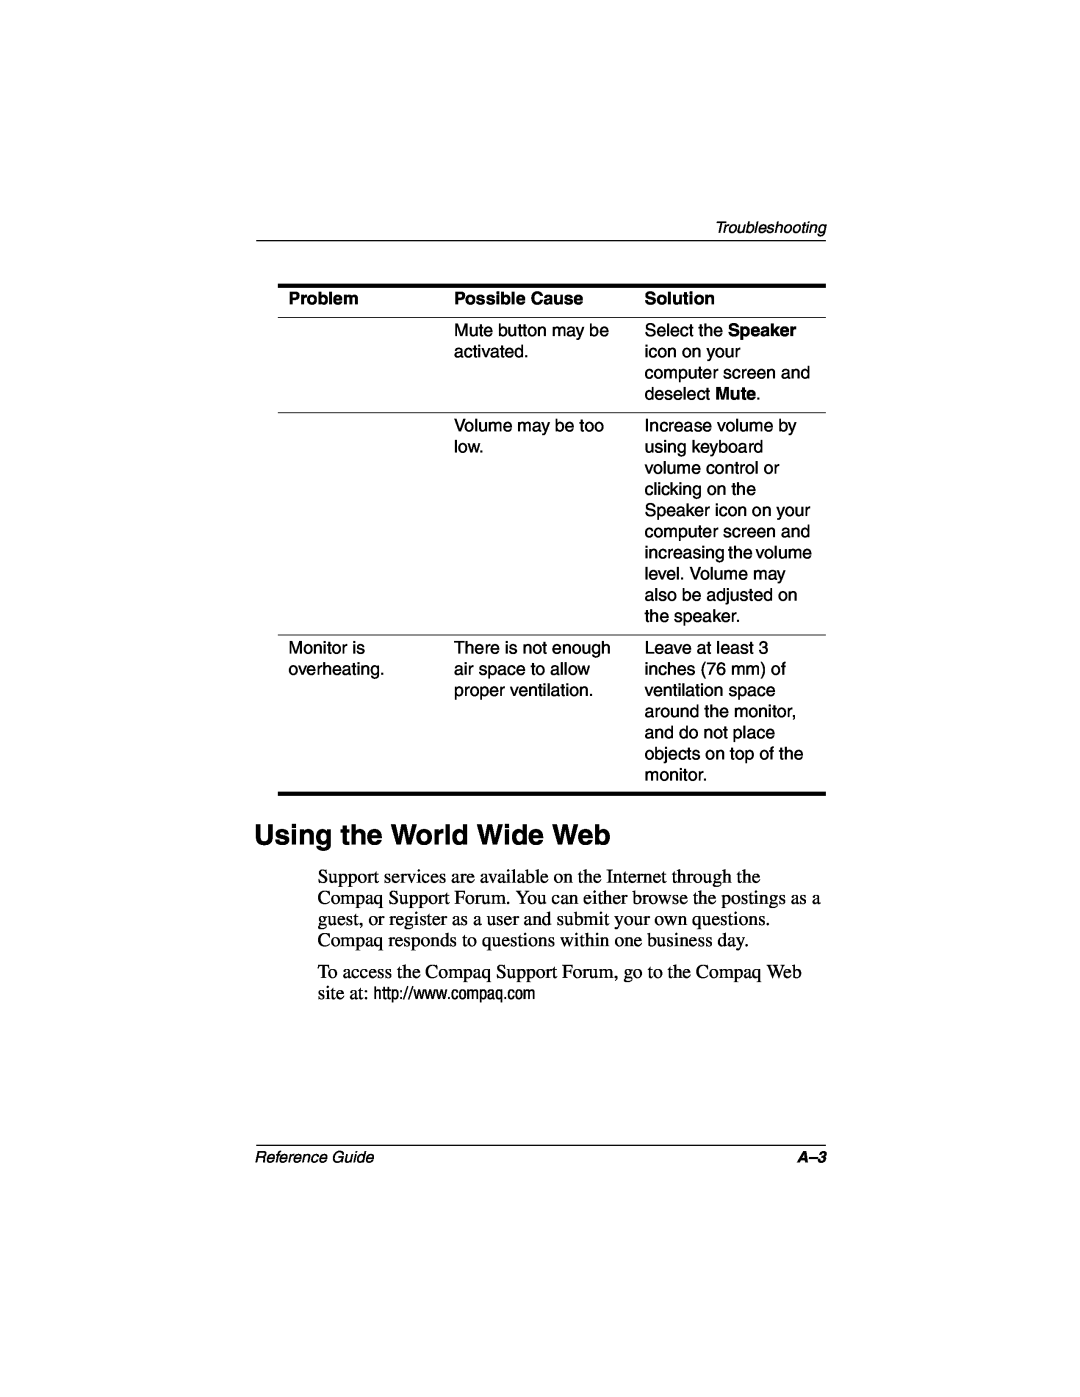 Compaq 5017 manual Using the World Wide Web, Problem, Possible Cause, Solution 